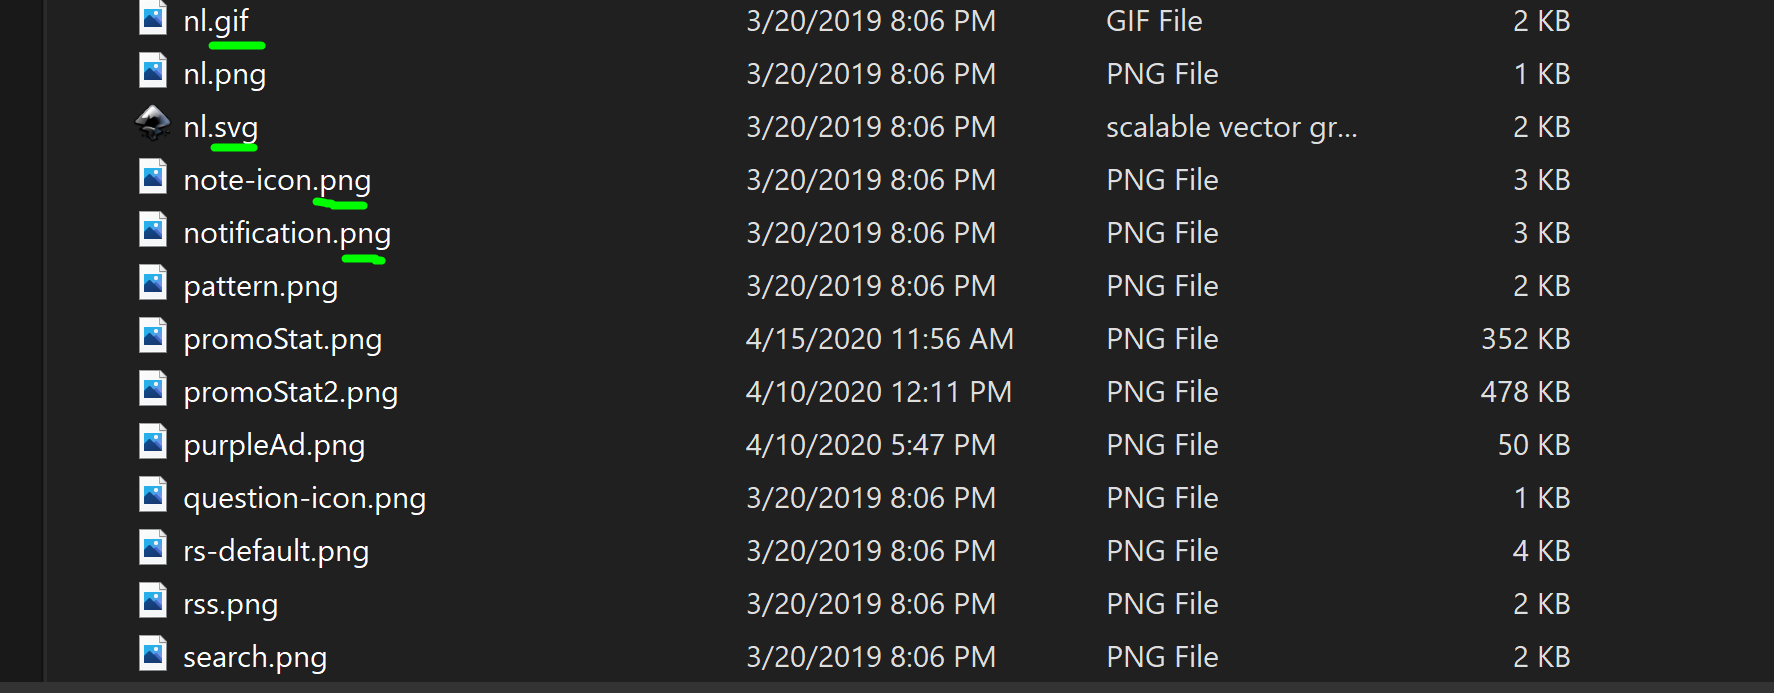 Display hidden folders and file extension